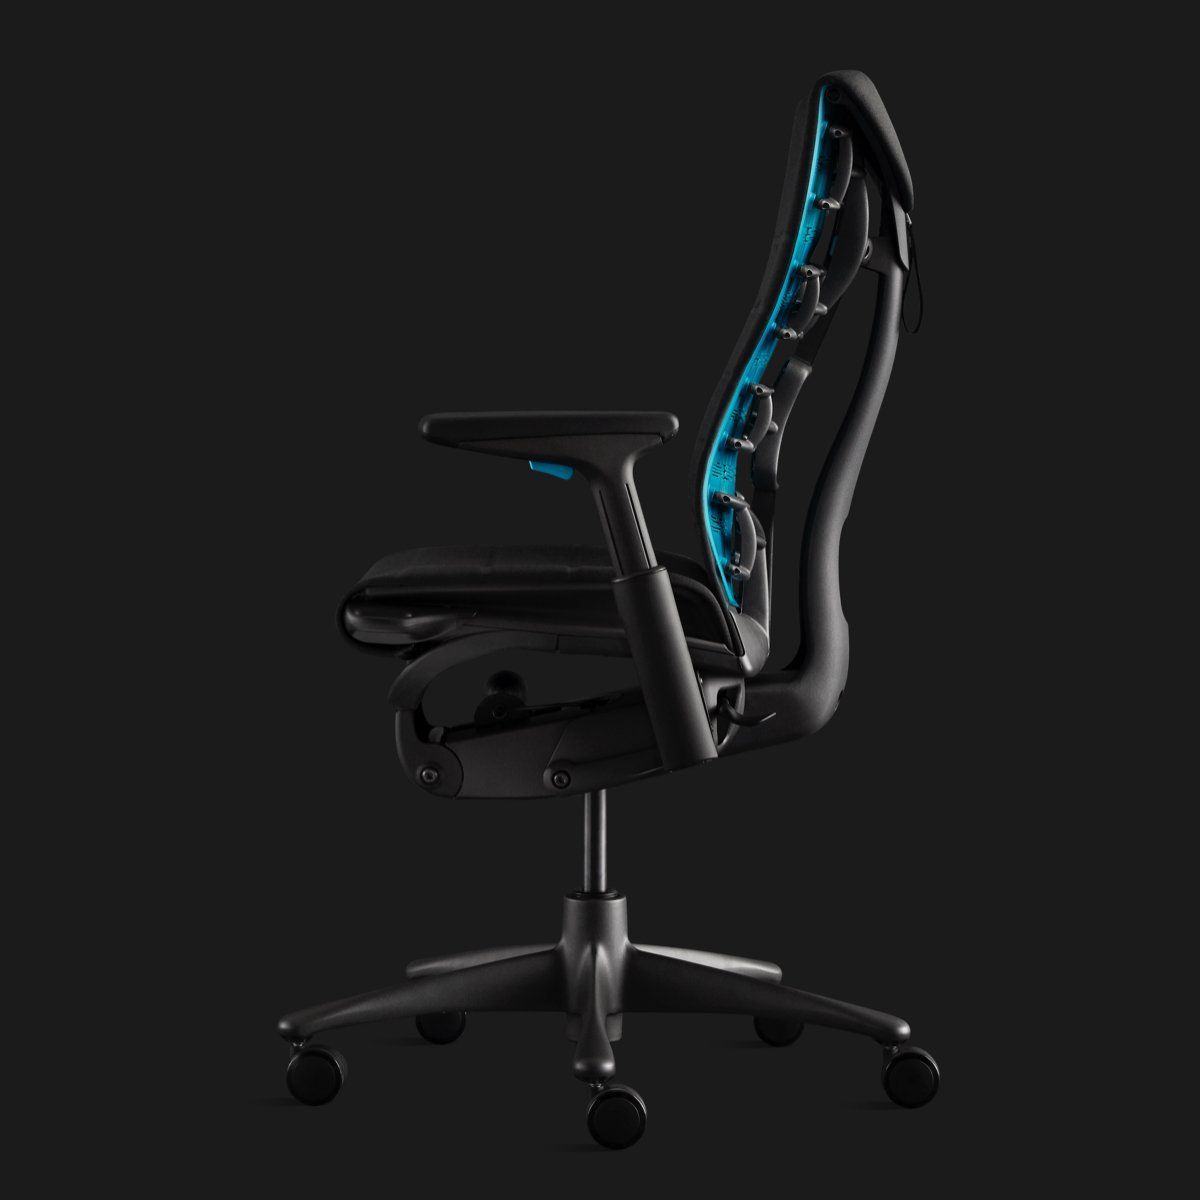 Embody Gaming Chair : vos fesses méritent ce fauteuil gaming à 1500 dollars #4